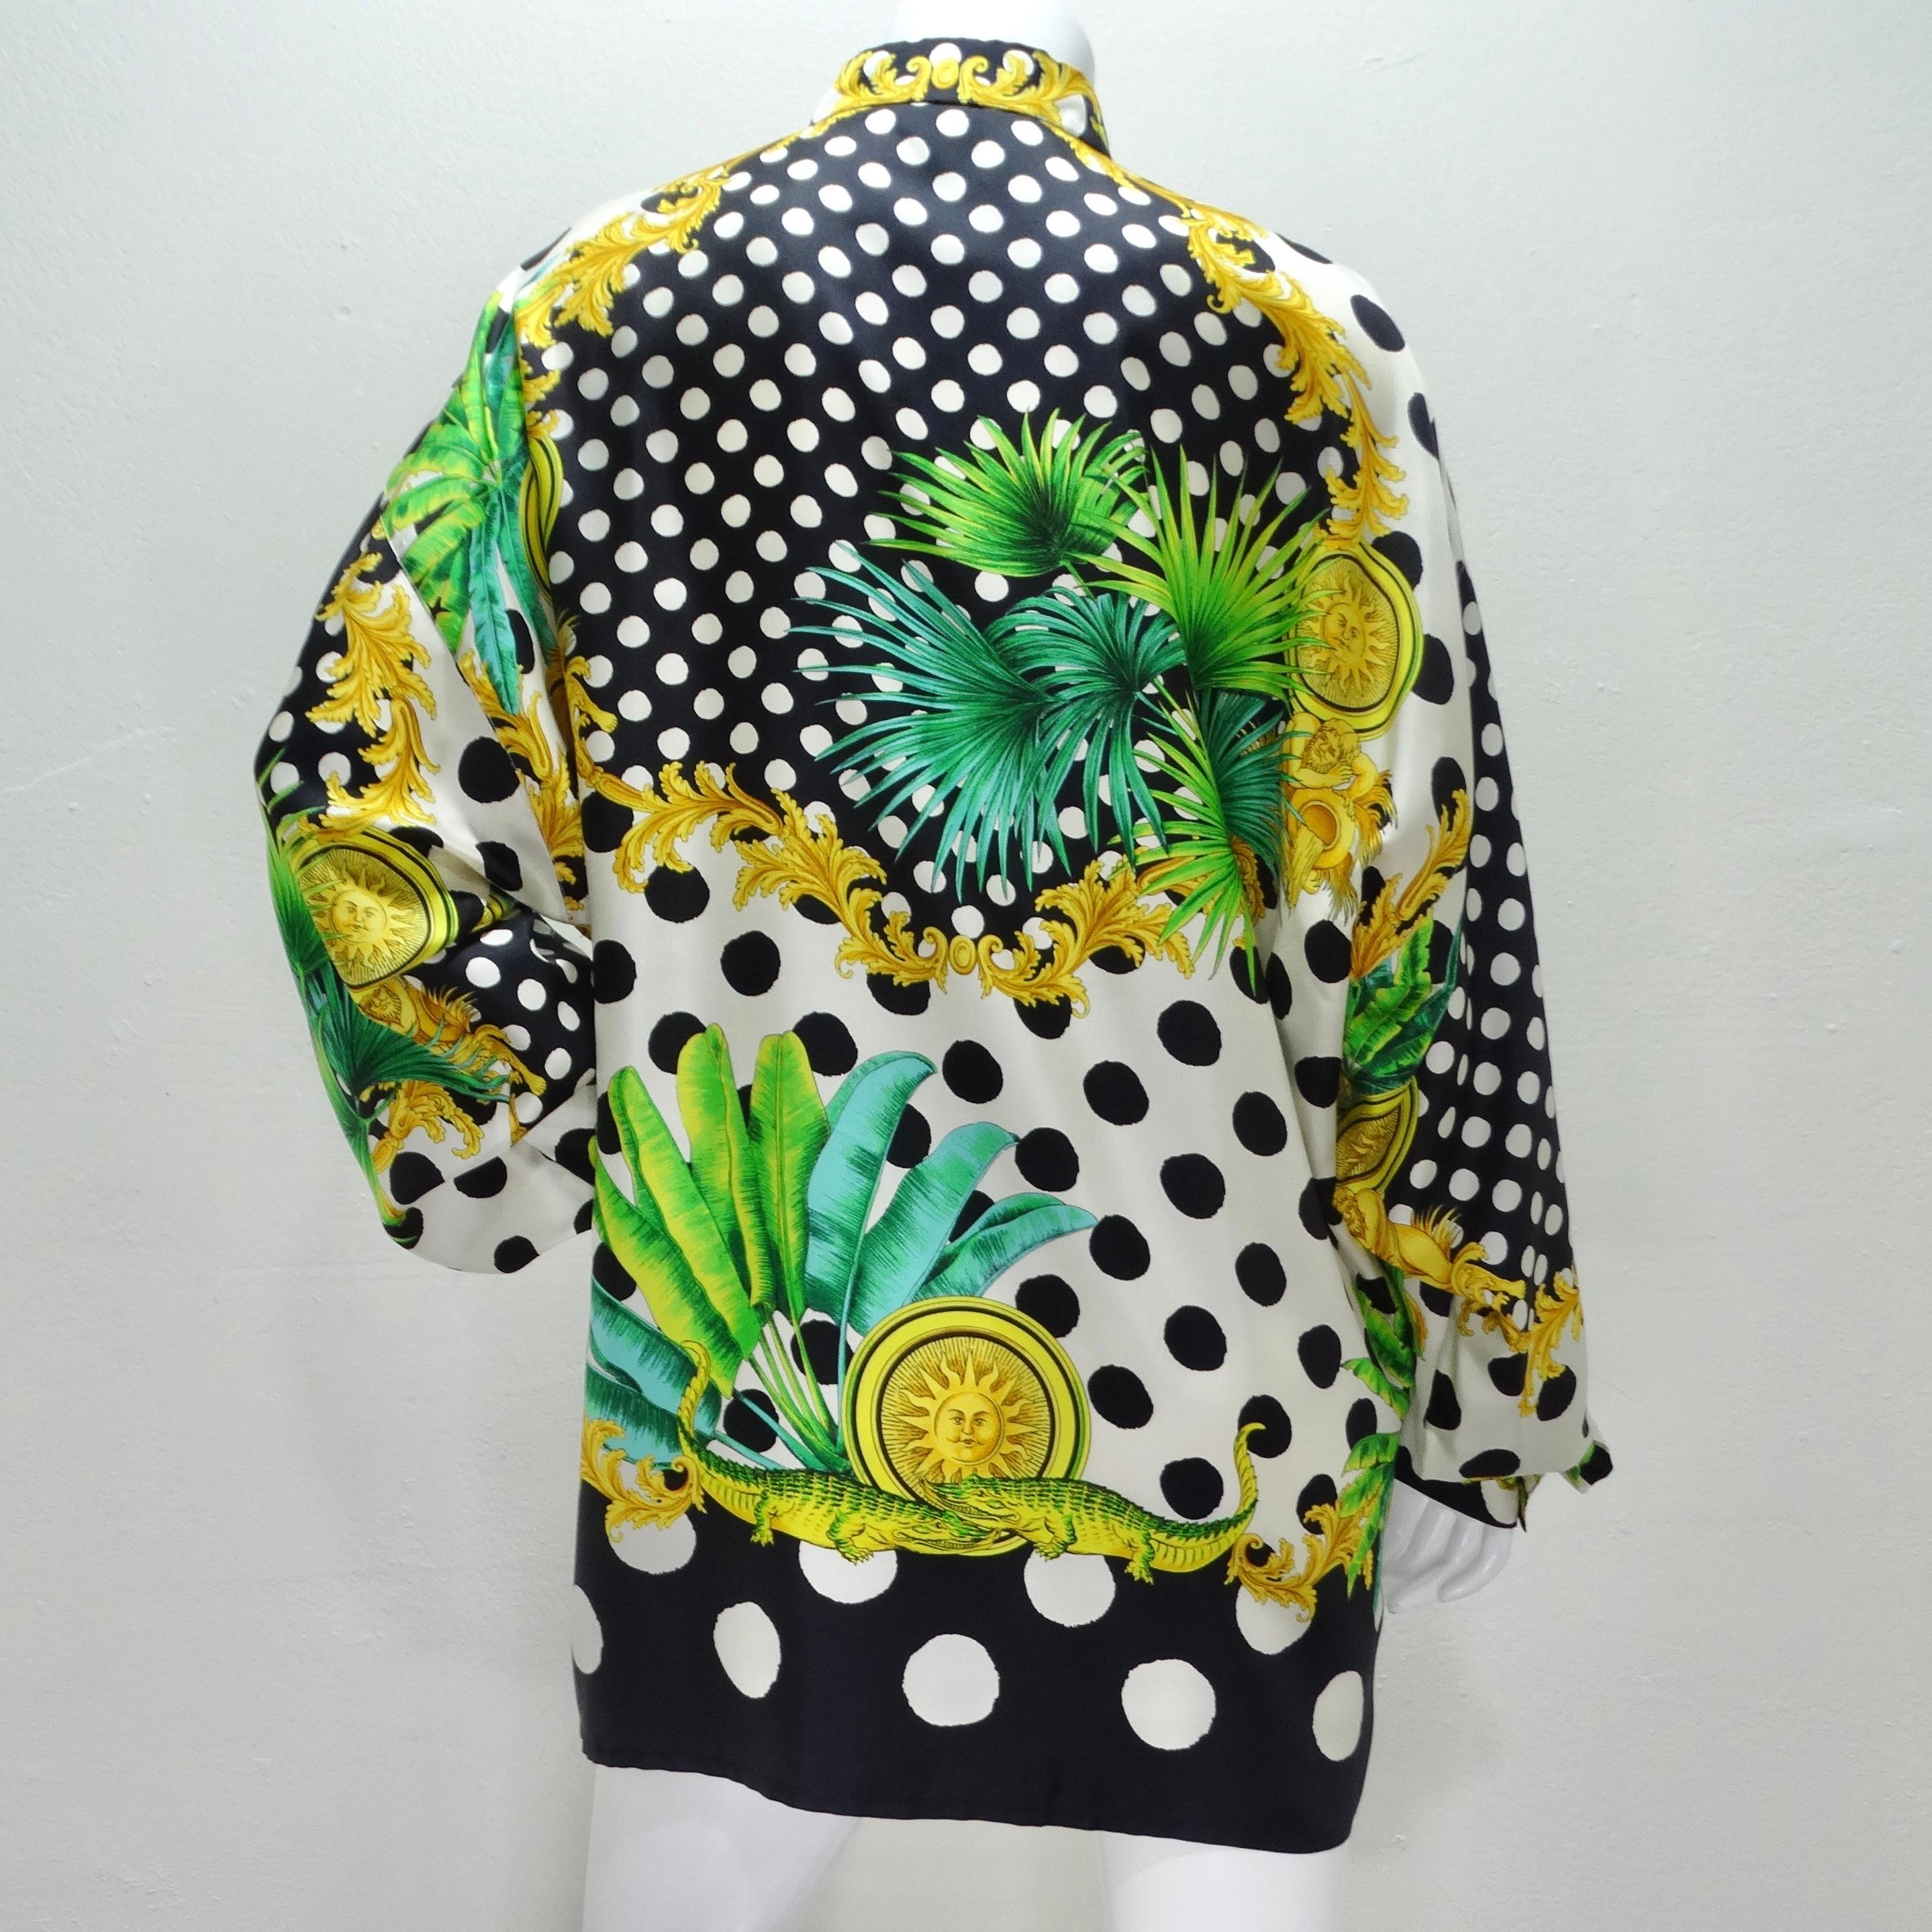 Gianni Versace 1990s Miami Collection Silk Printed Shirt For Sale 1